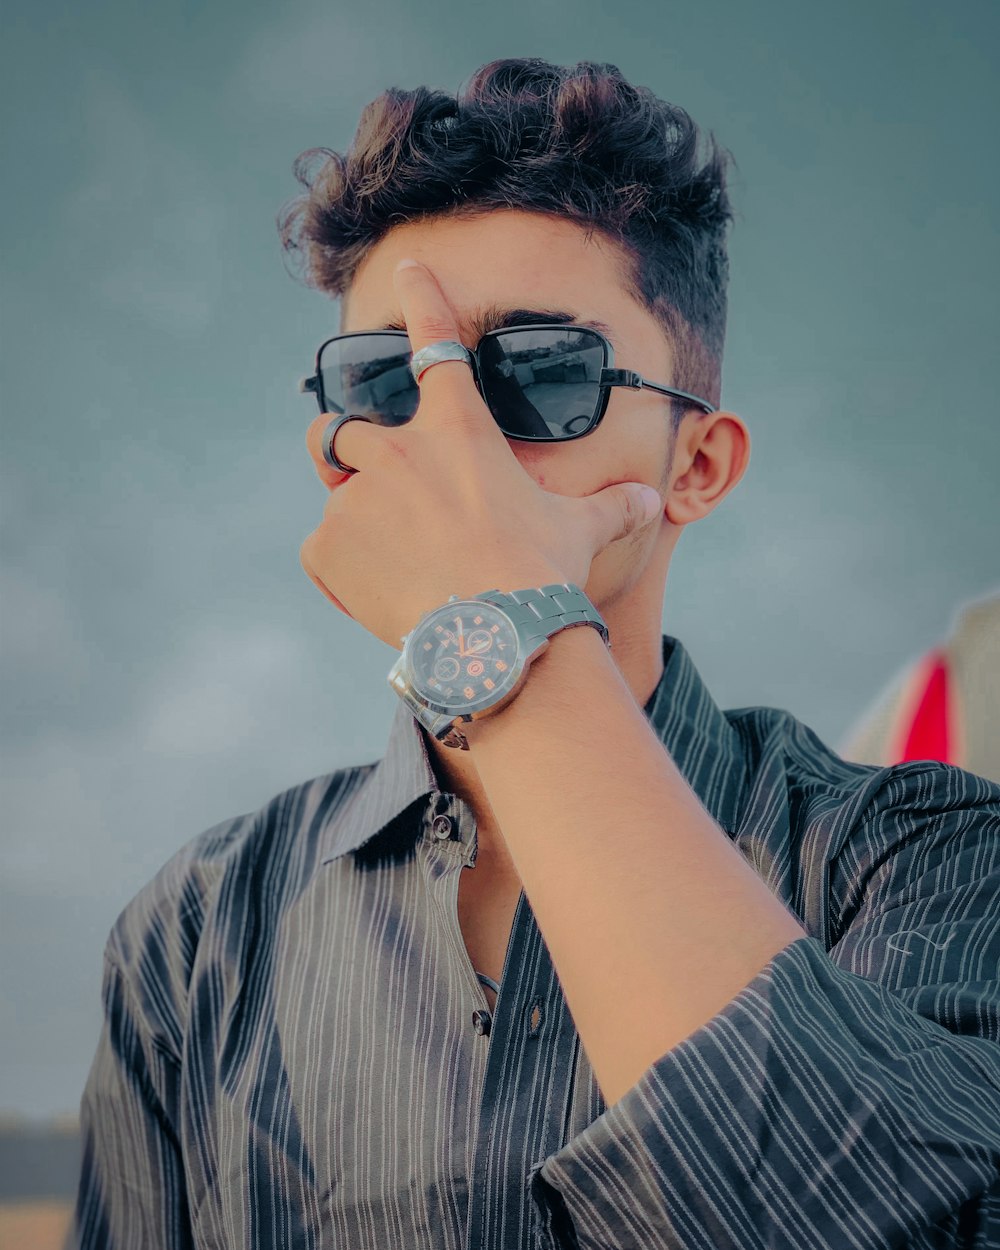 a man wearing sunglasses and a watch on his wrist